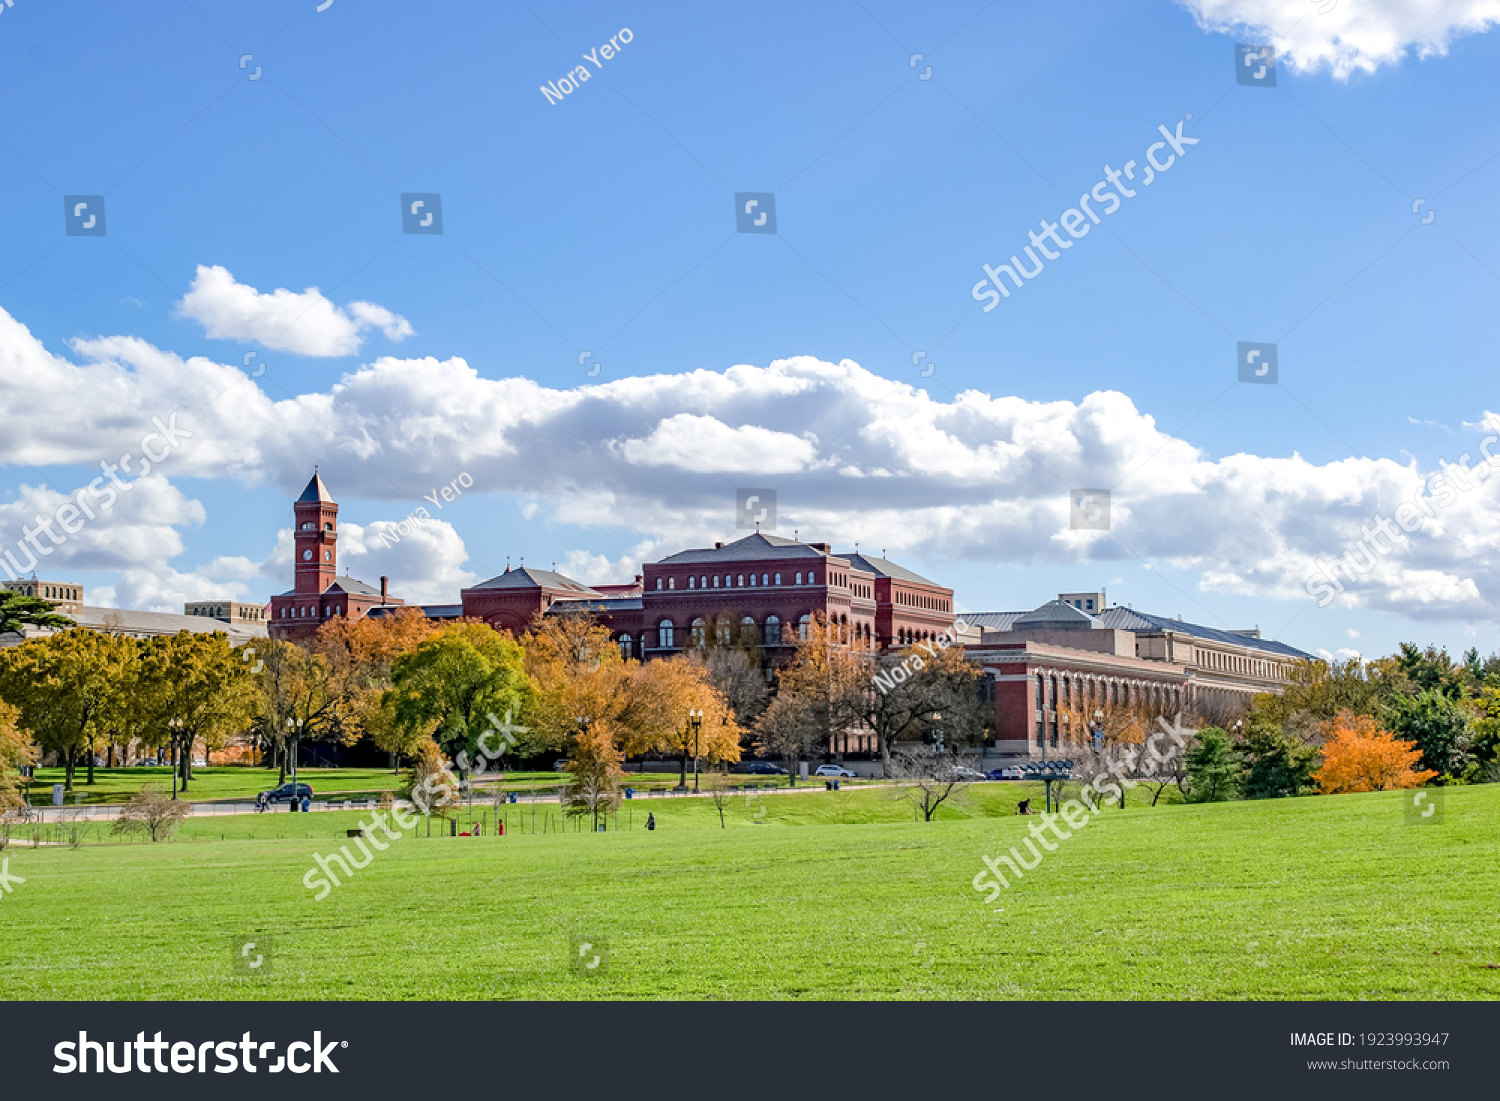 beautiful view of clemson university historic building on a sunny day #1923993947